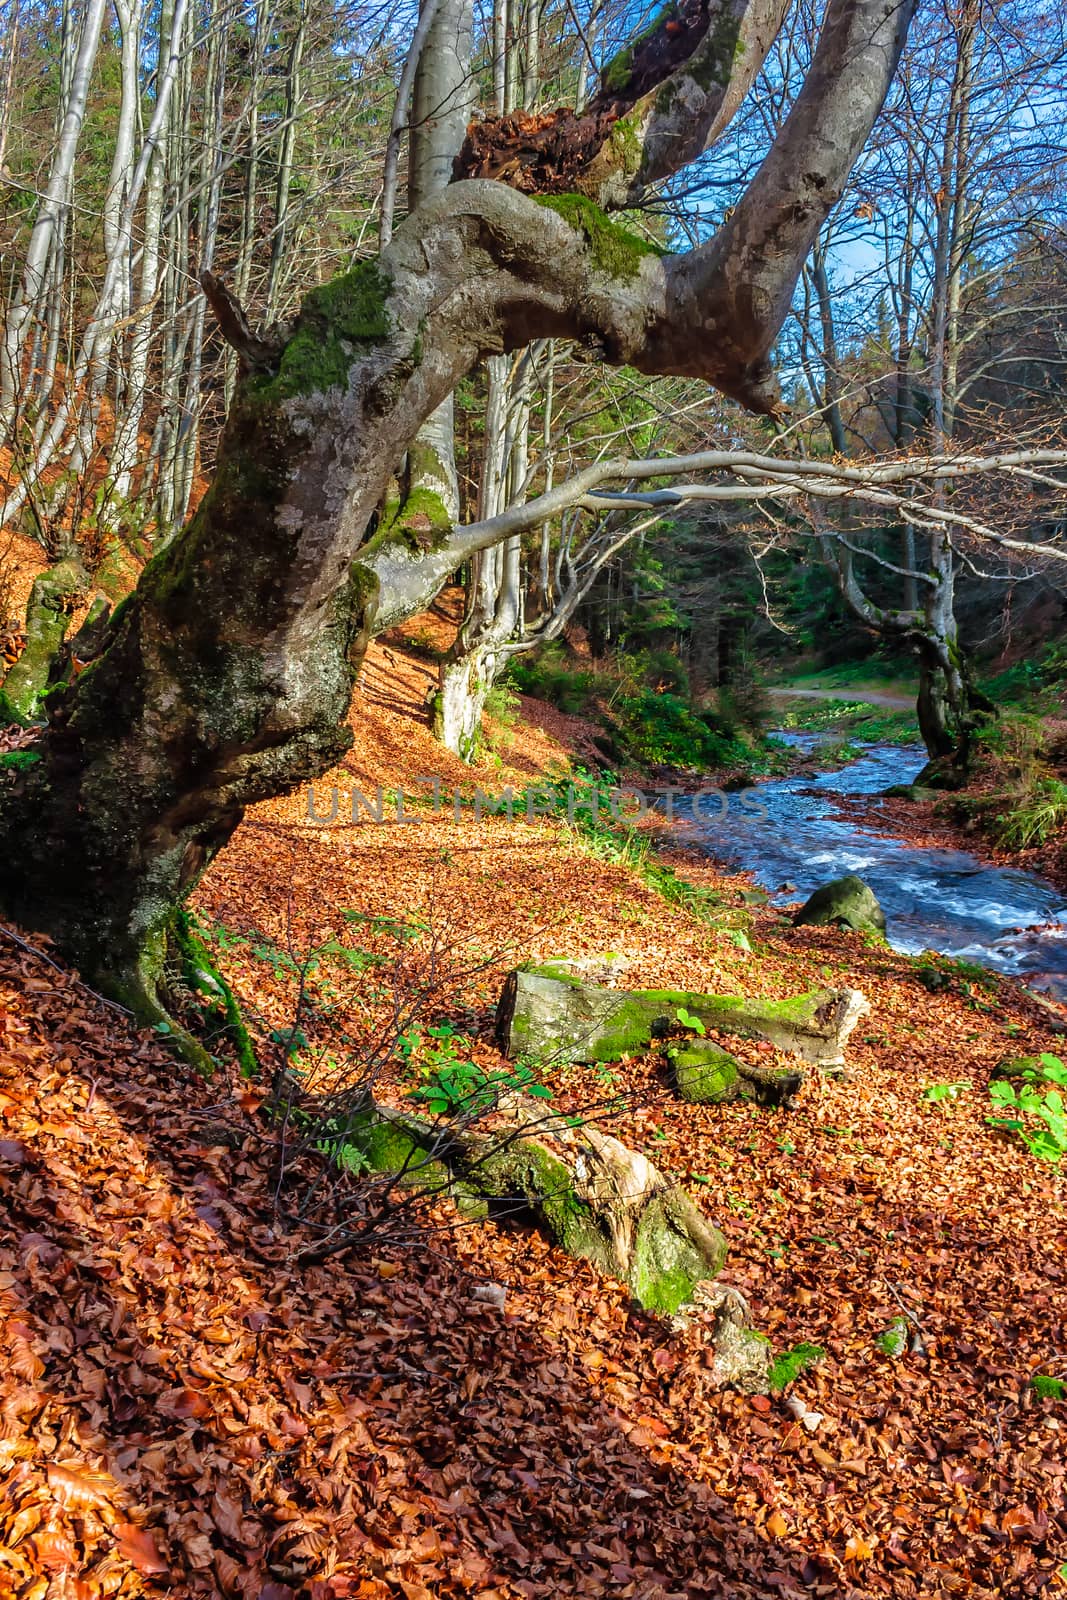 Mountain stream flows among the stones through autumn forest with some moss on the trees and orange foliage on the ground